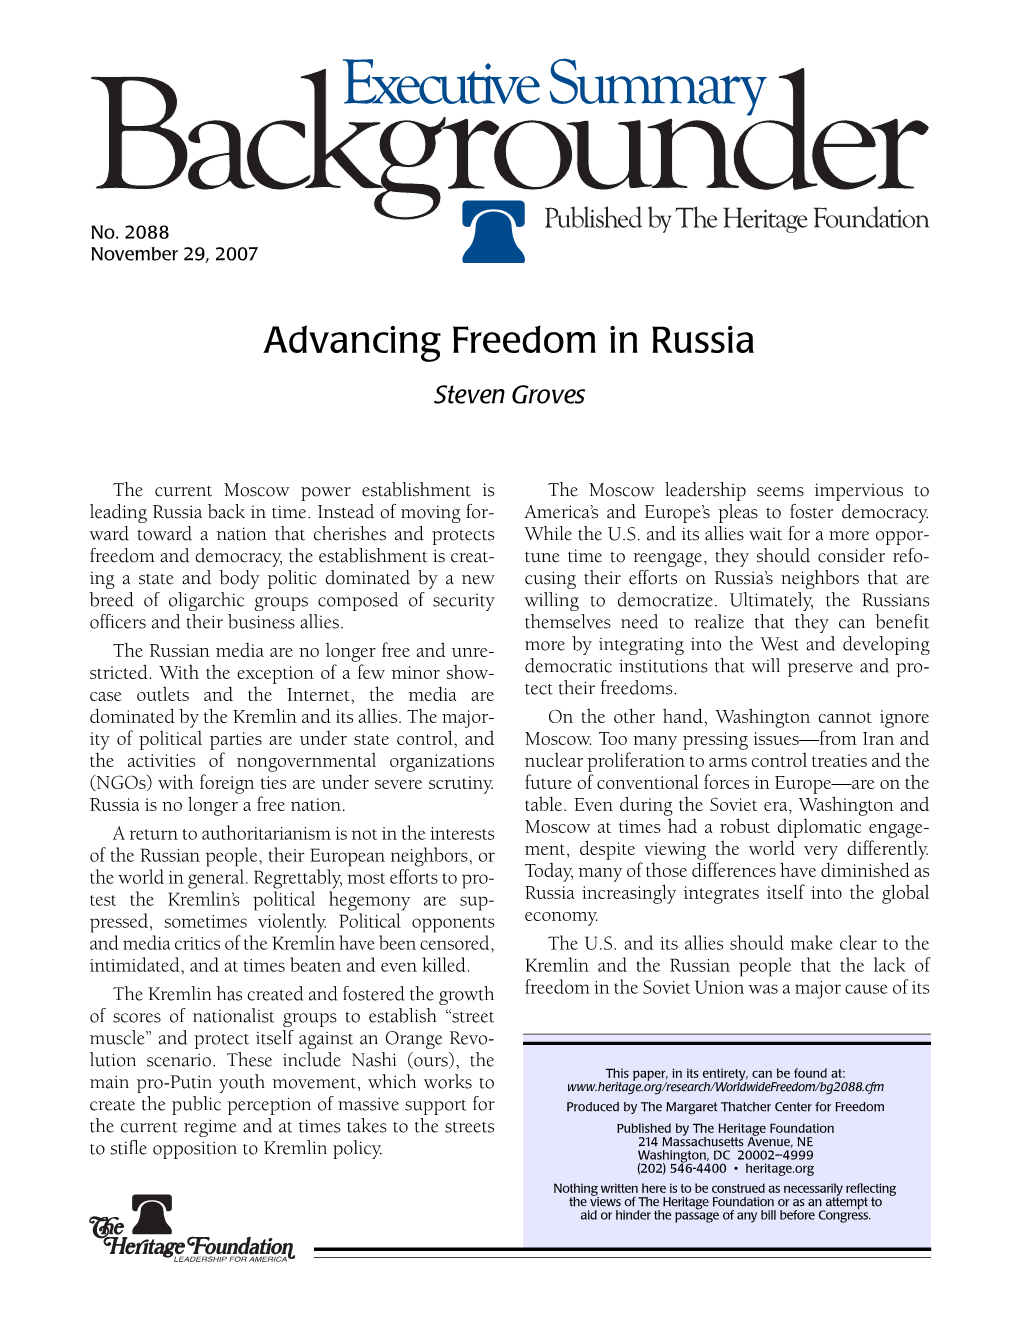 Advancing Freedom in Russia Steven Groves